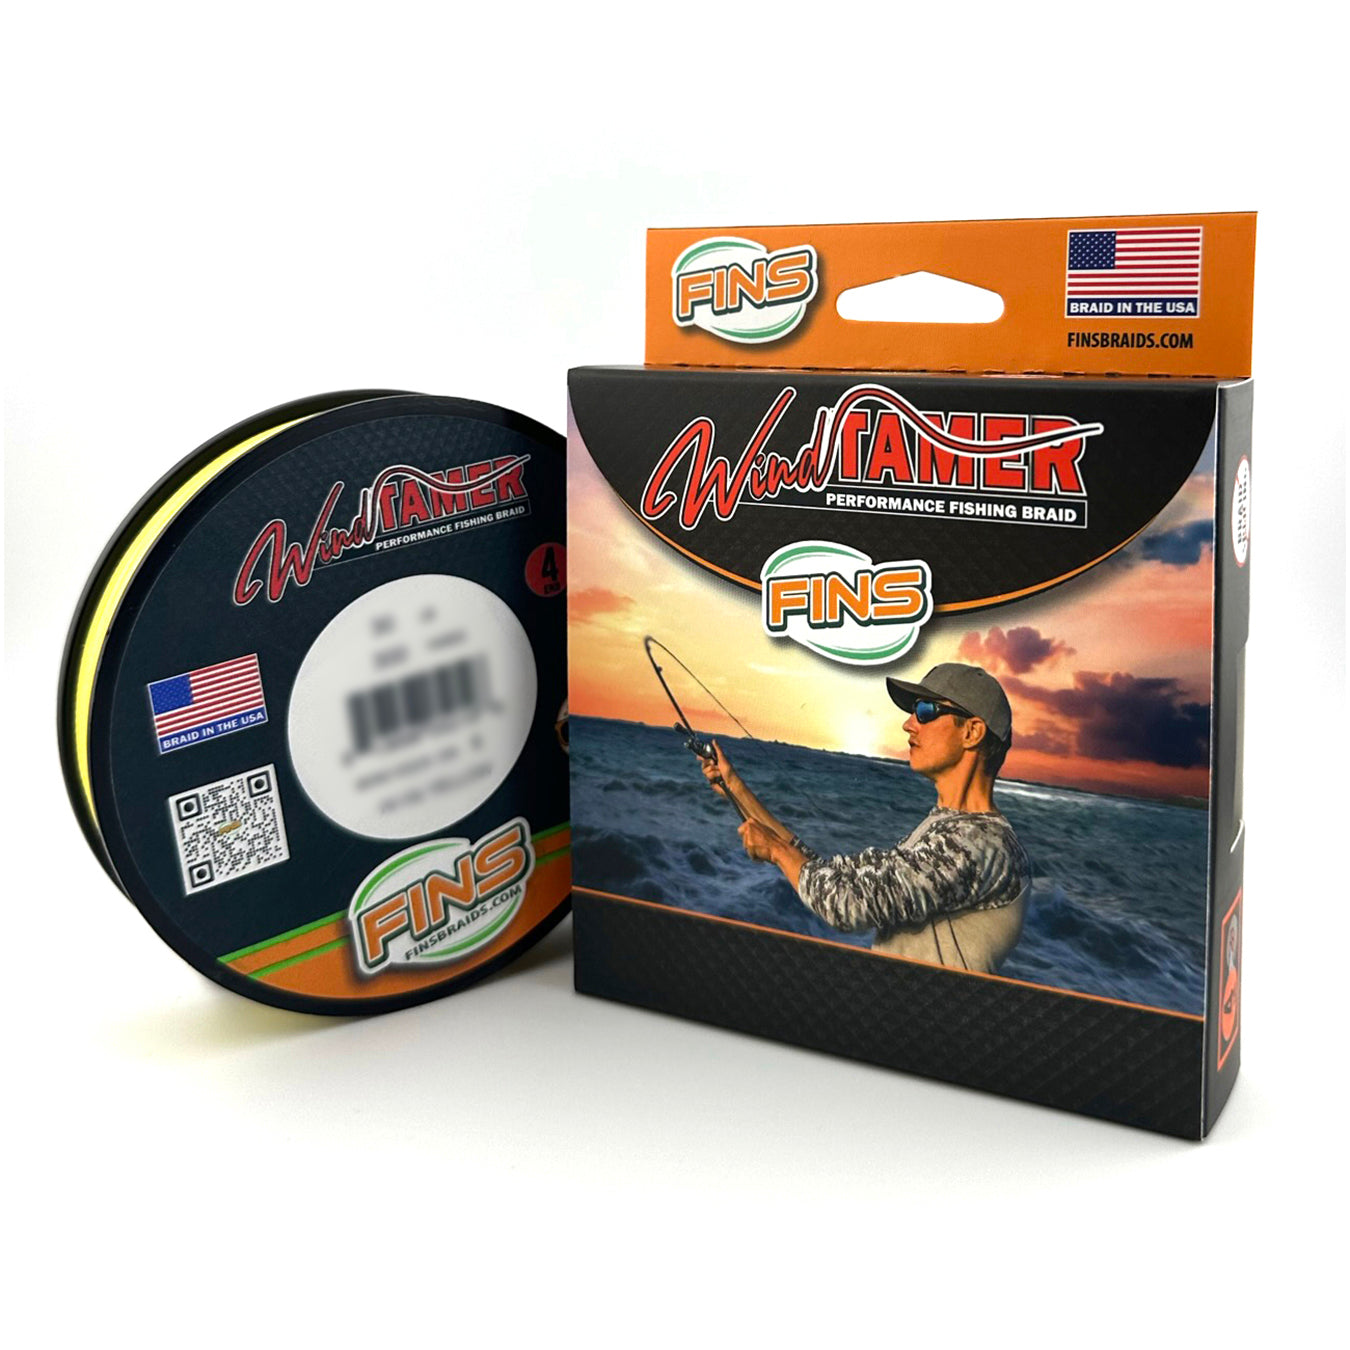 Yellow spool and box braided fishing line Windtamer by Fins